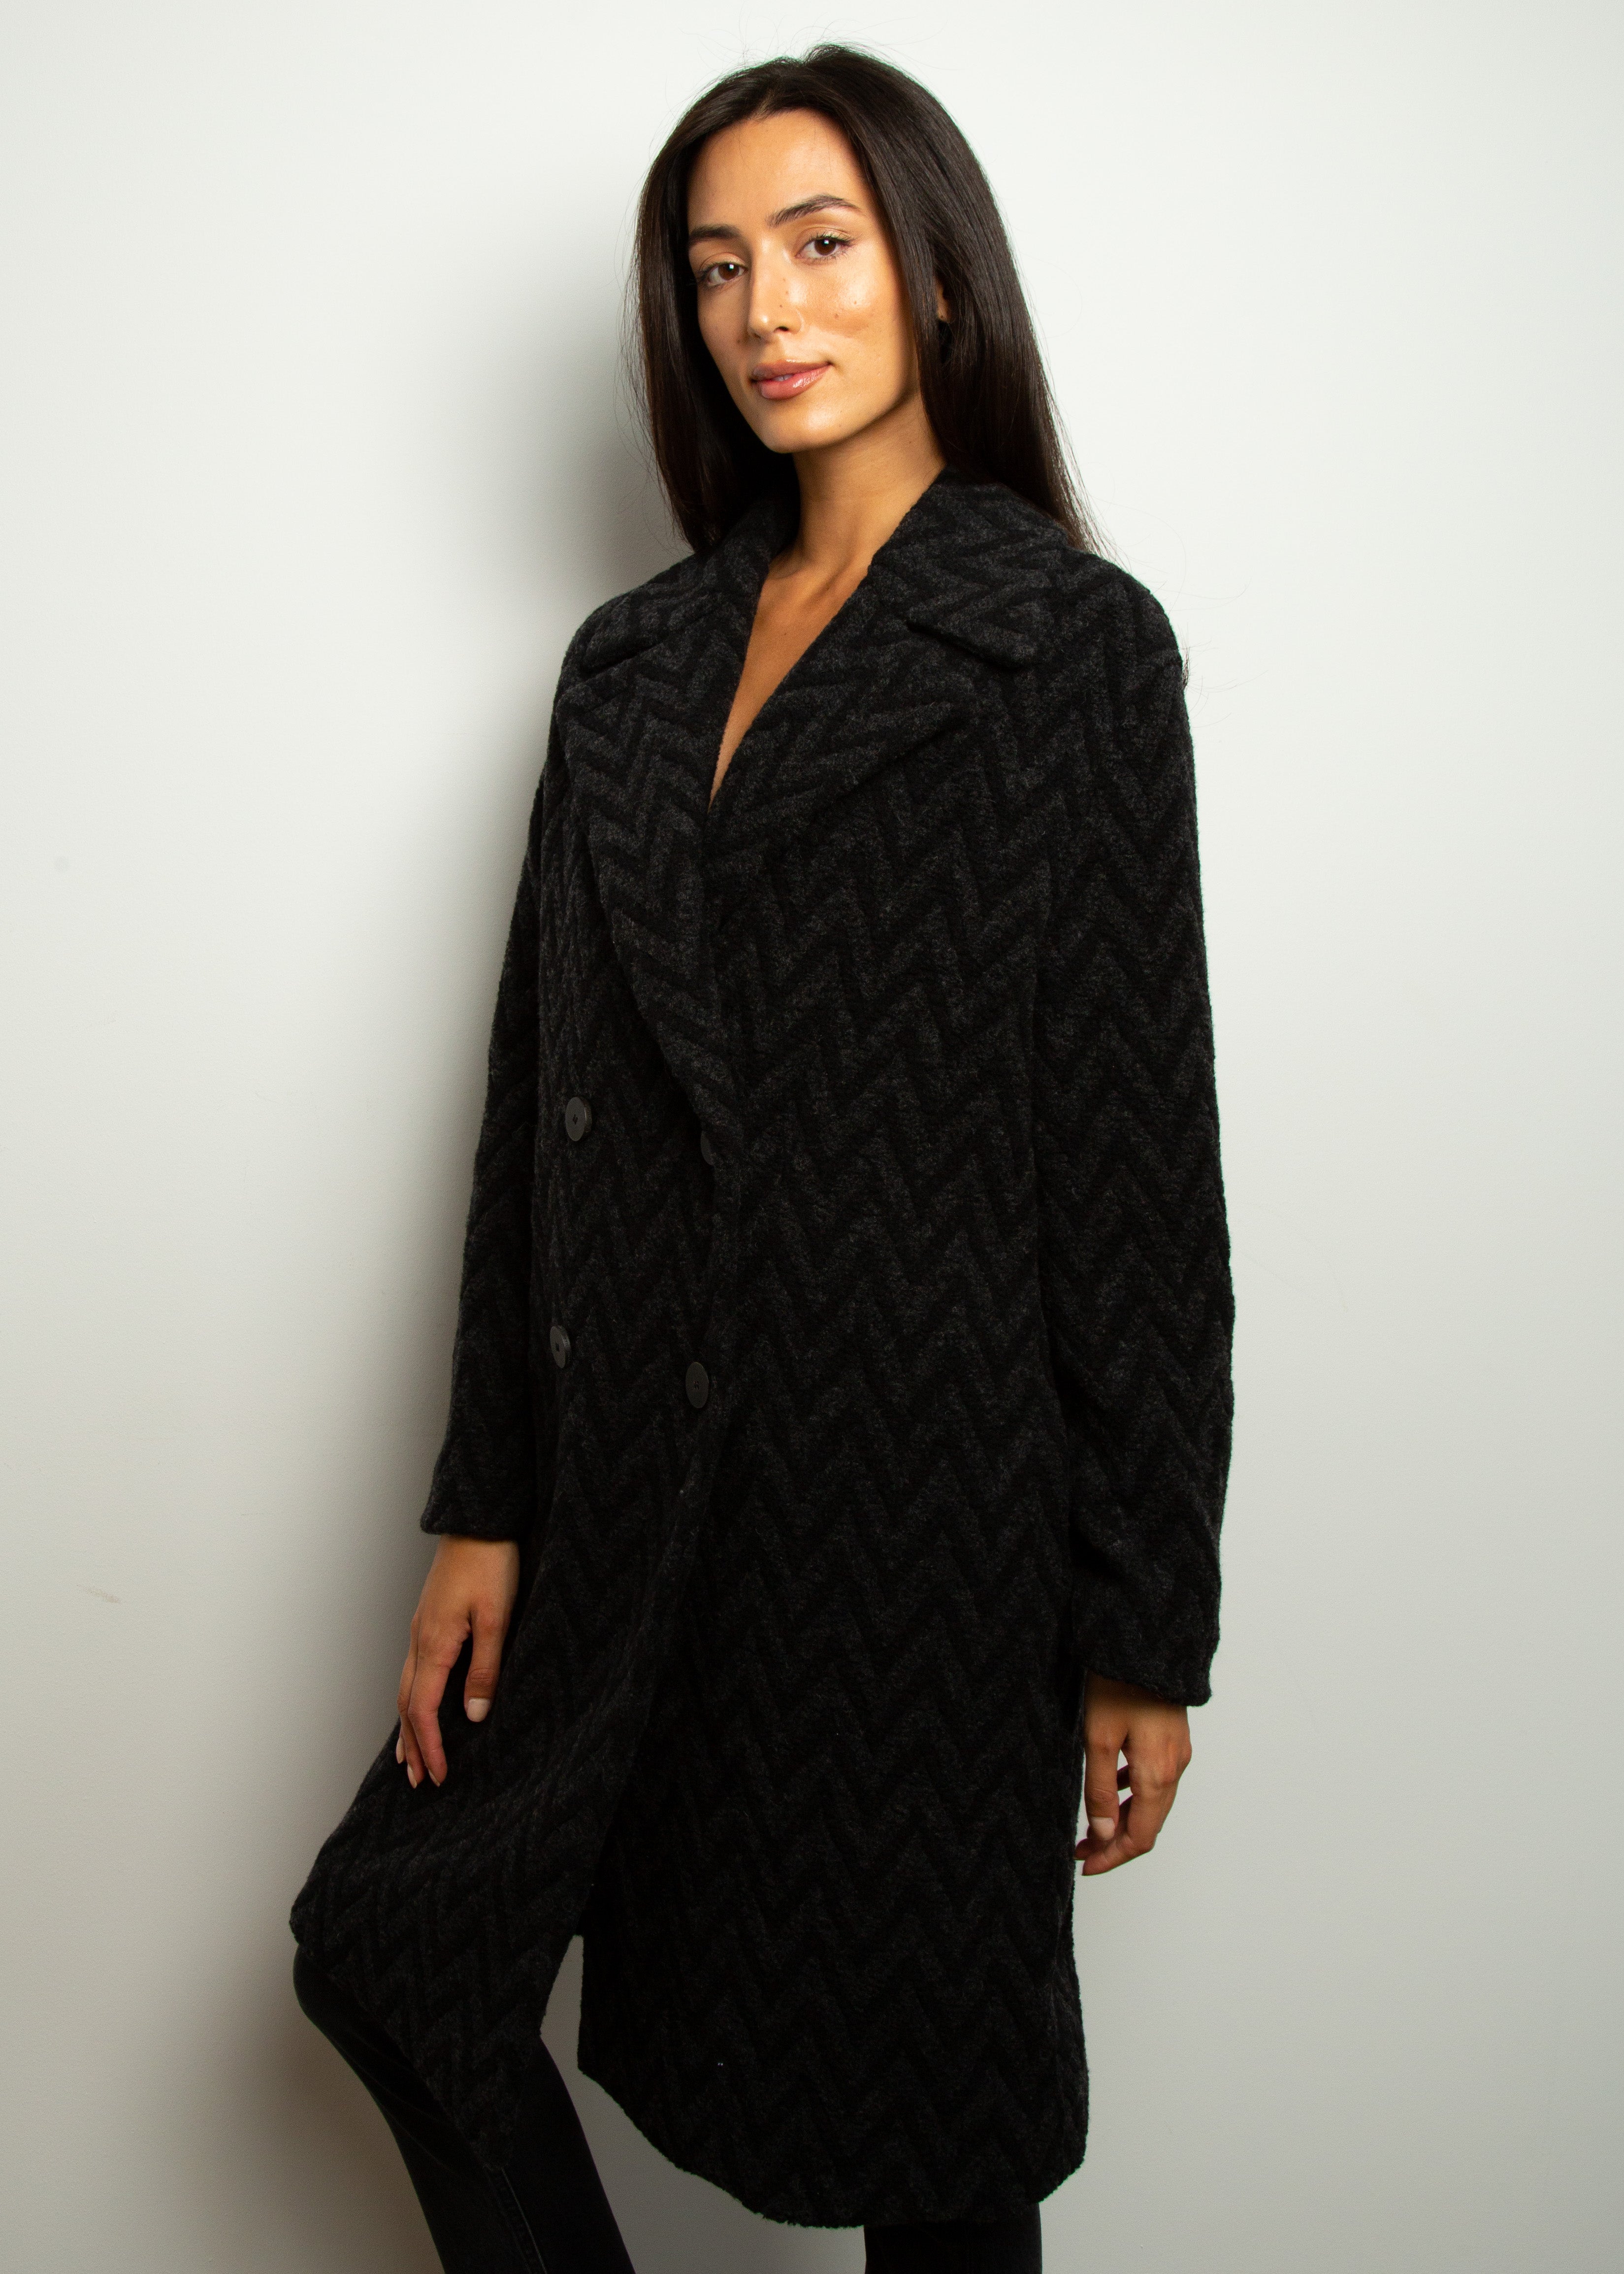 HW Jacquard Boucle Double Breasted Coat in Charcoal